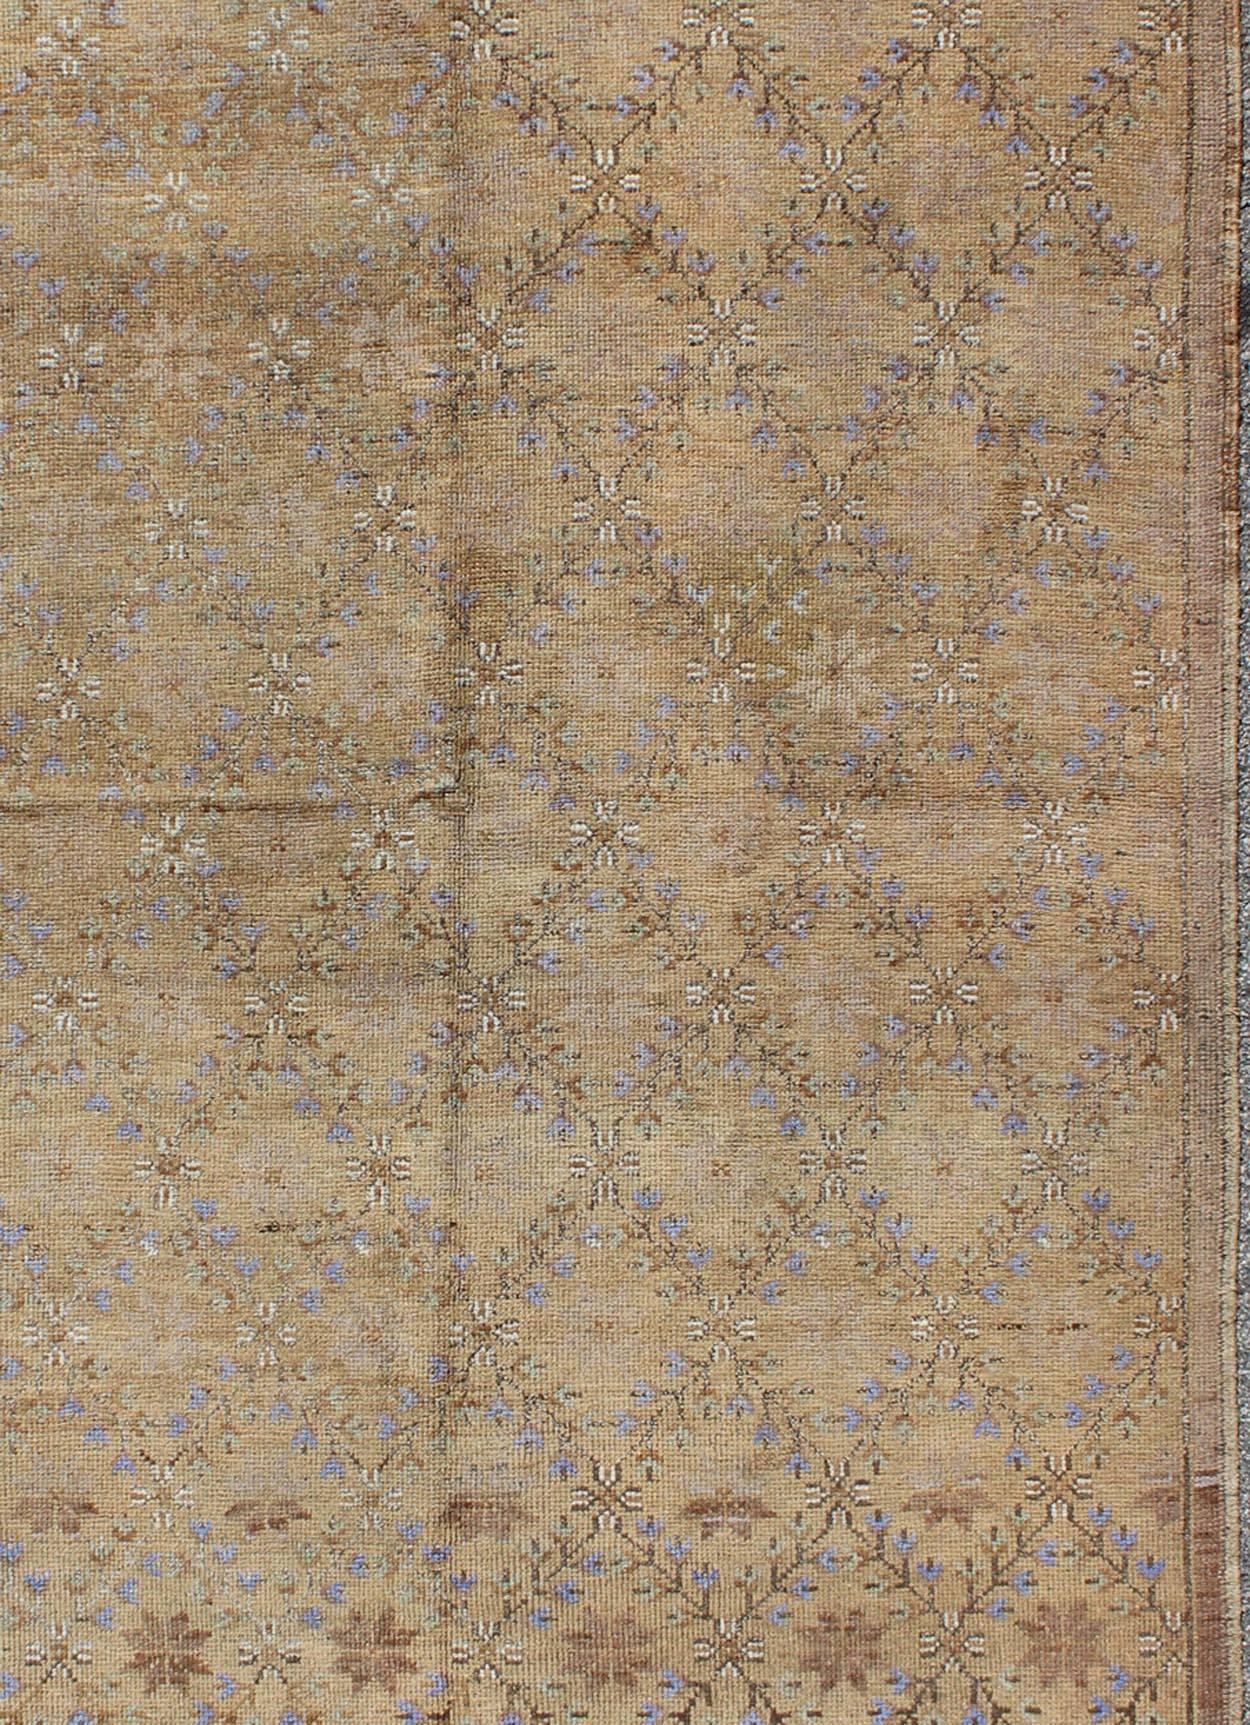 Turkish Oushak Rug with All-Over Design and Neutral Colors; Tan, Taupe, Icy Blue In Good Condition For Sale In Atlanta, GA